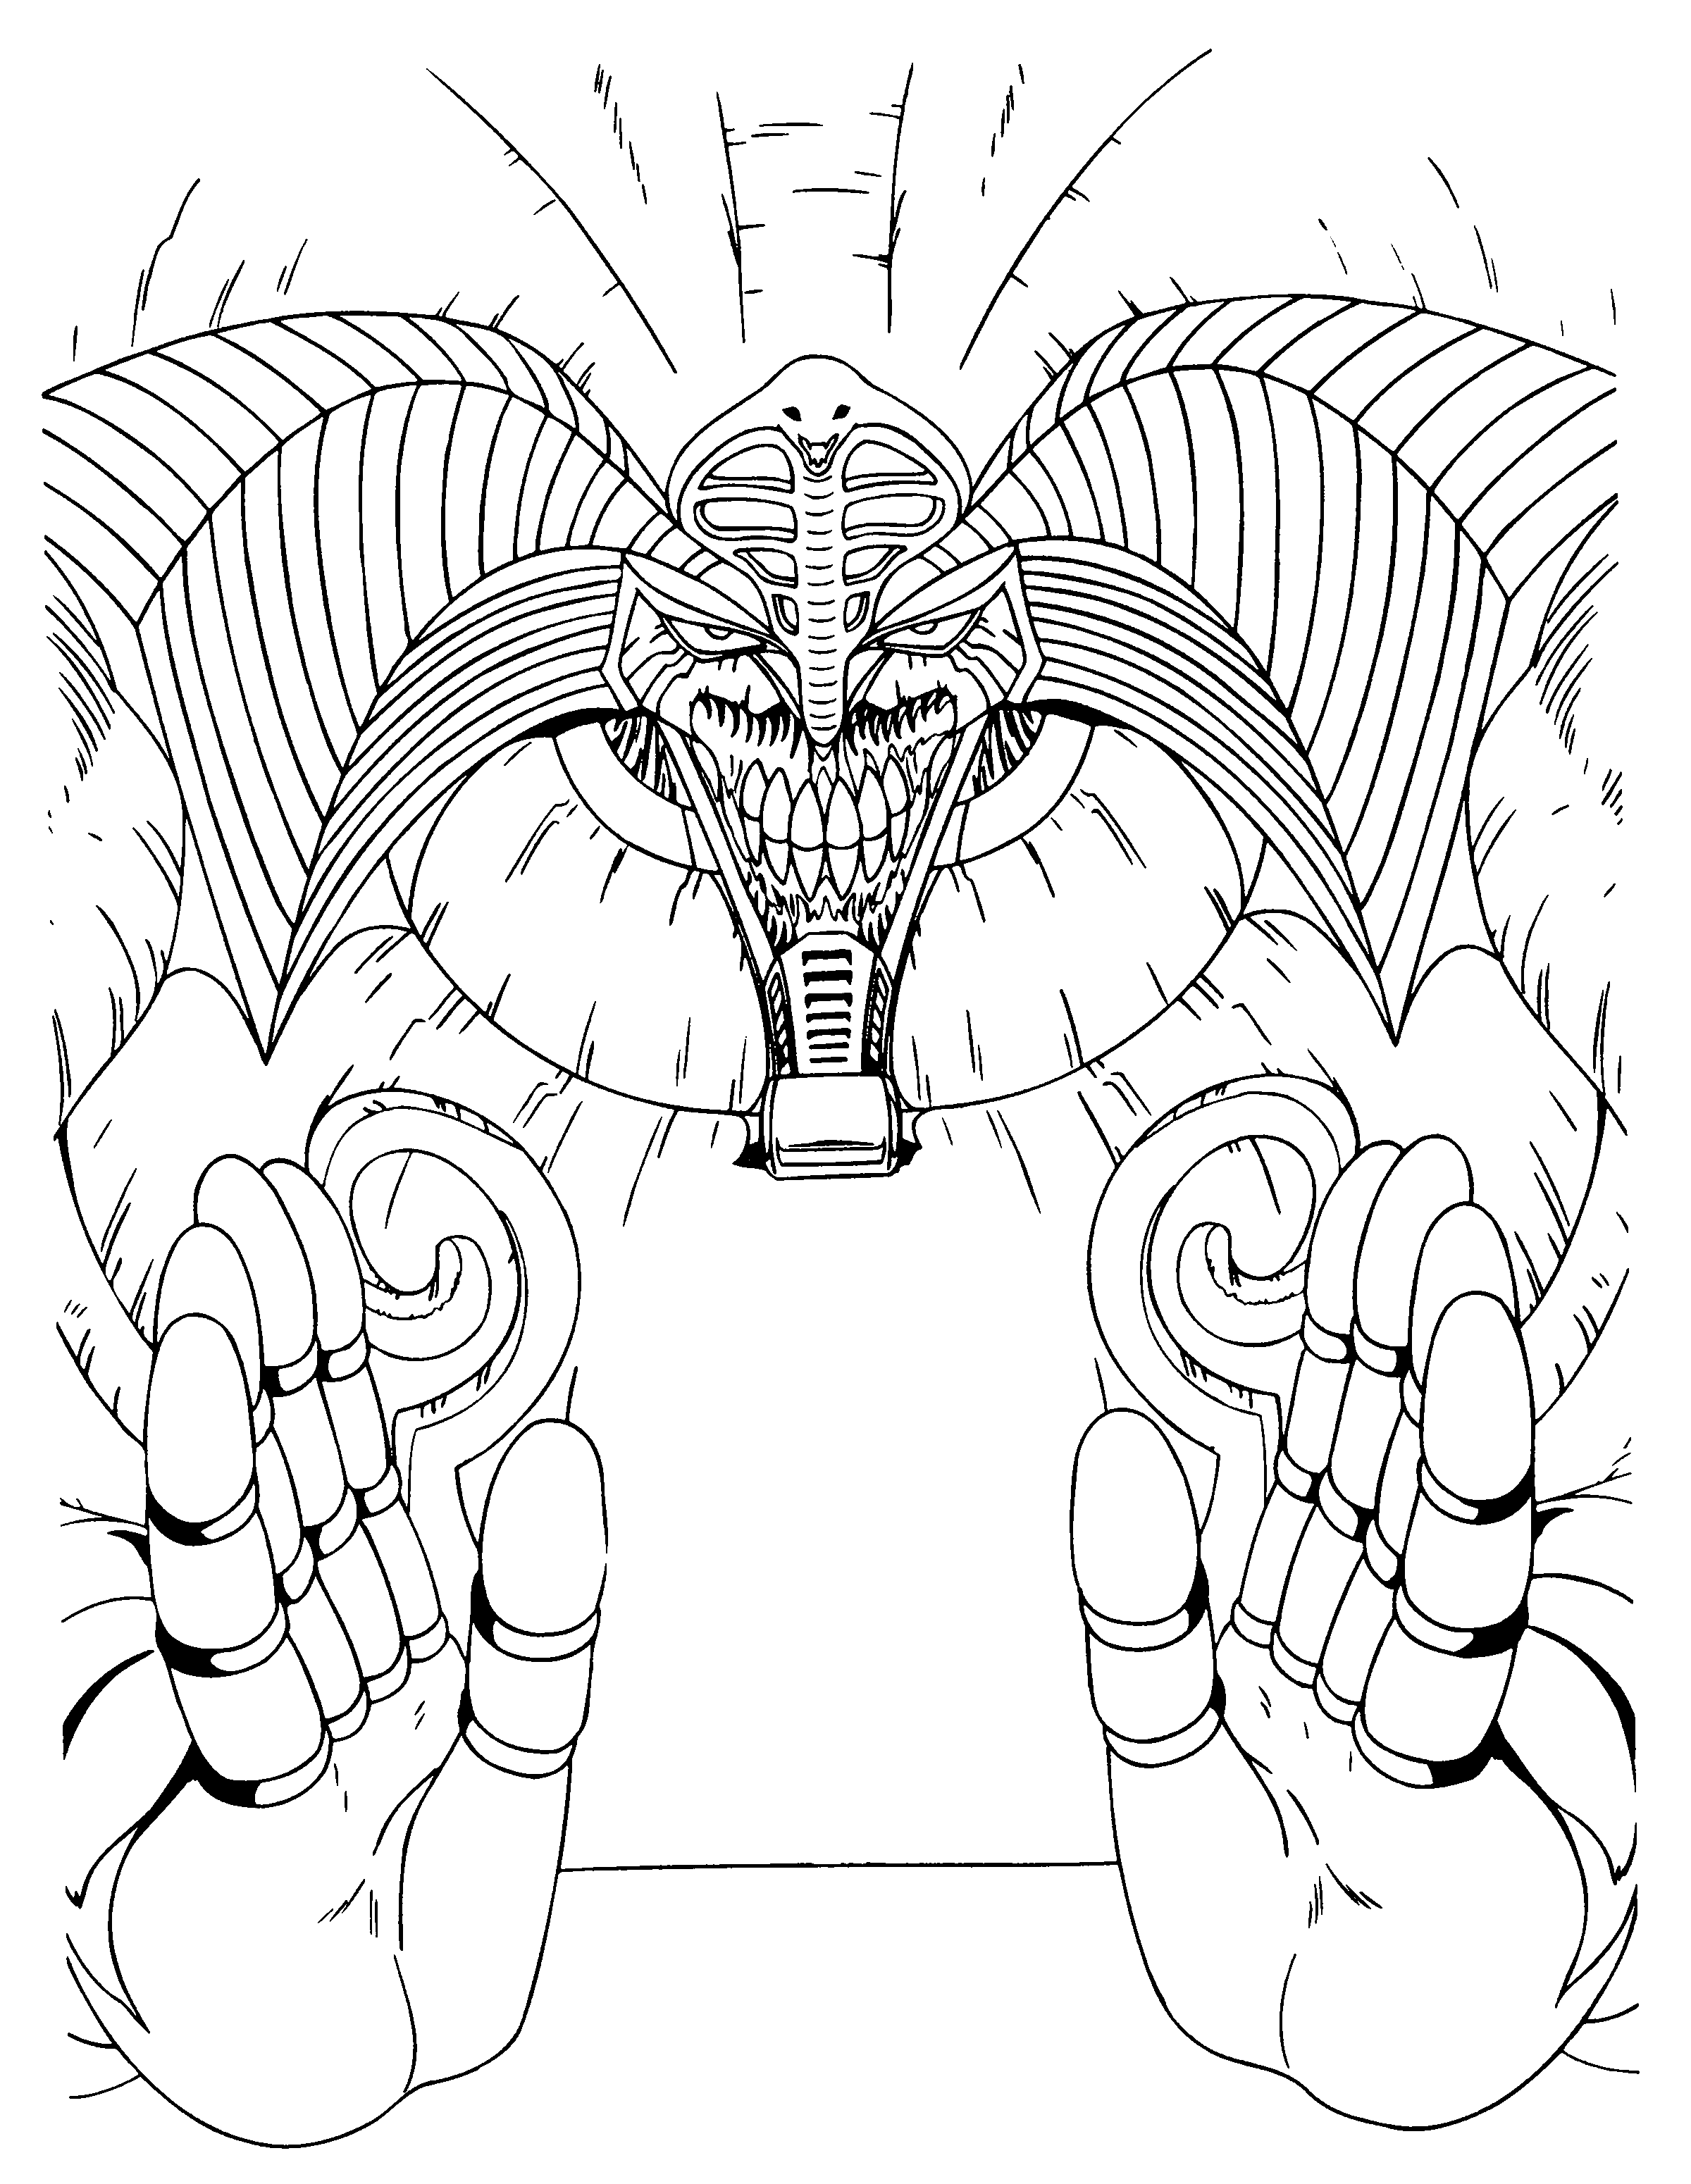 Yu Gi Oh Exodia Coloring Pages Coloring Pages 